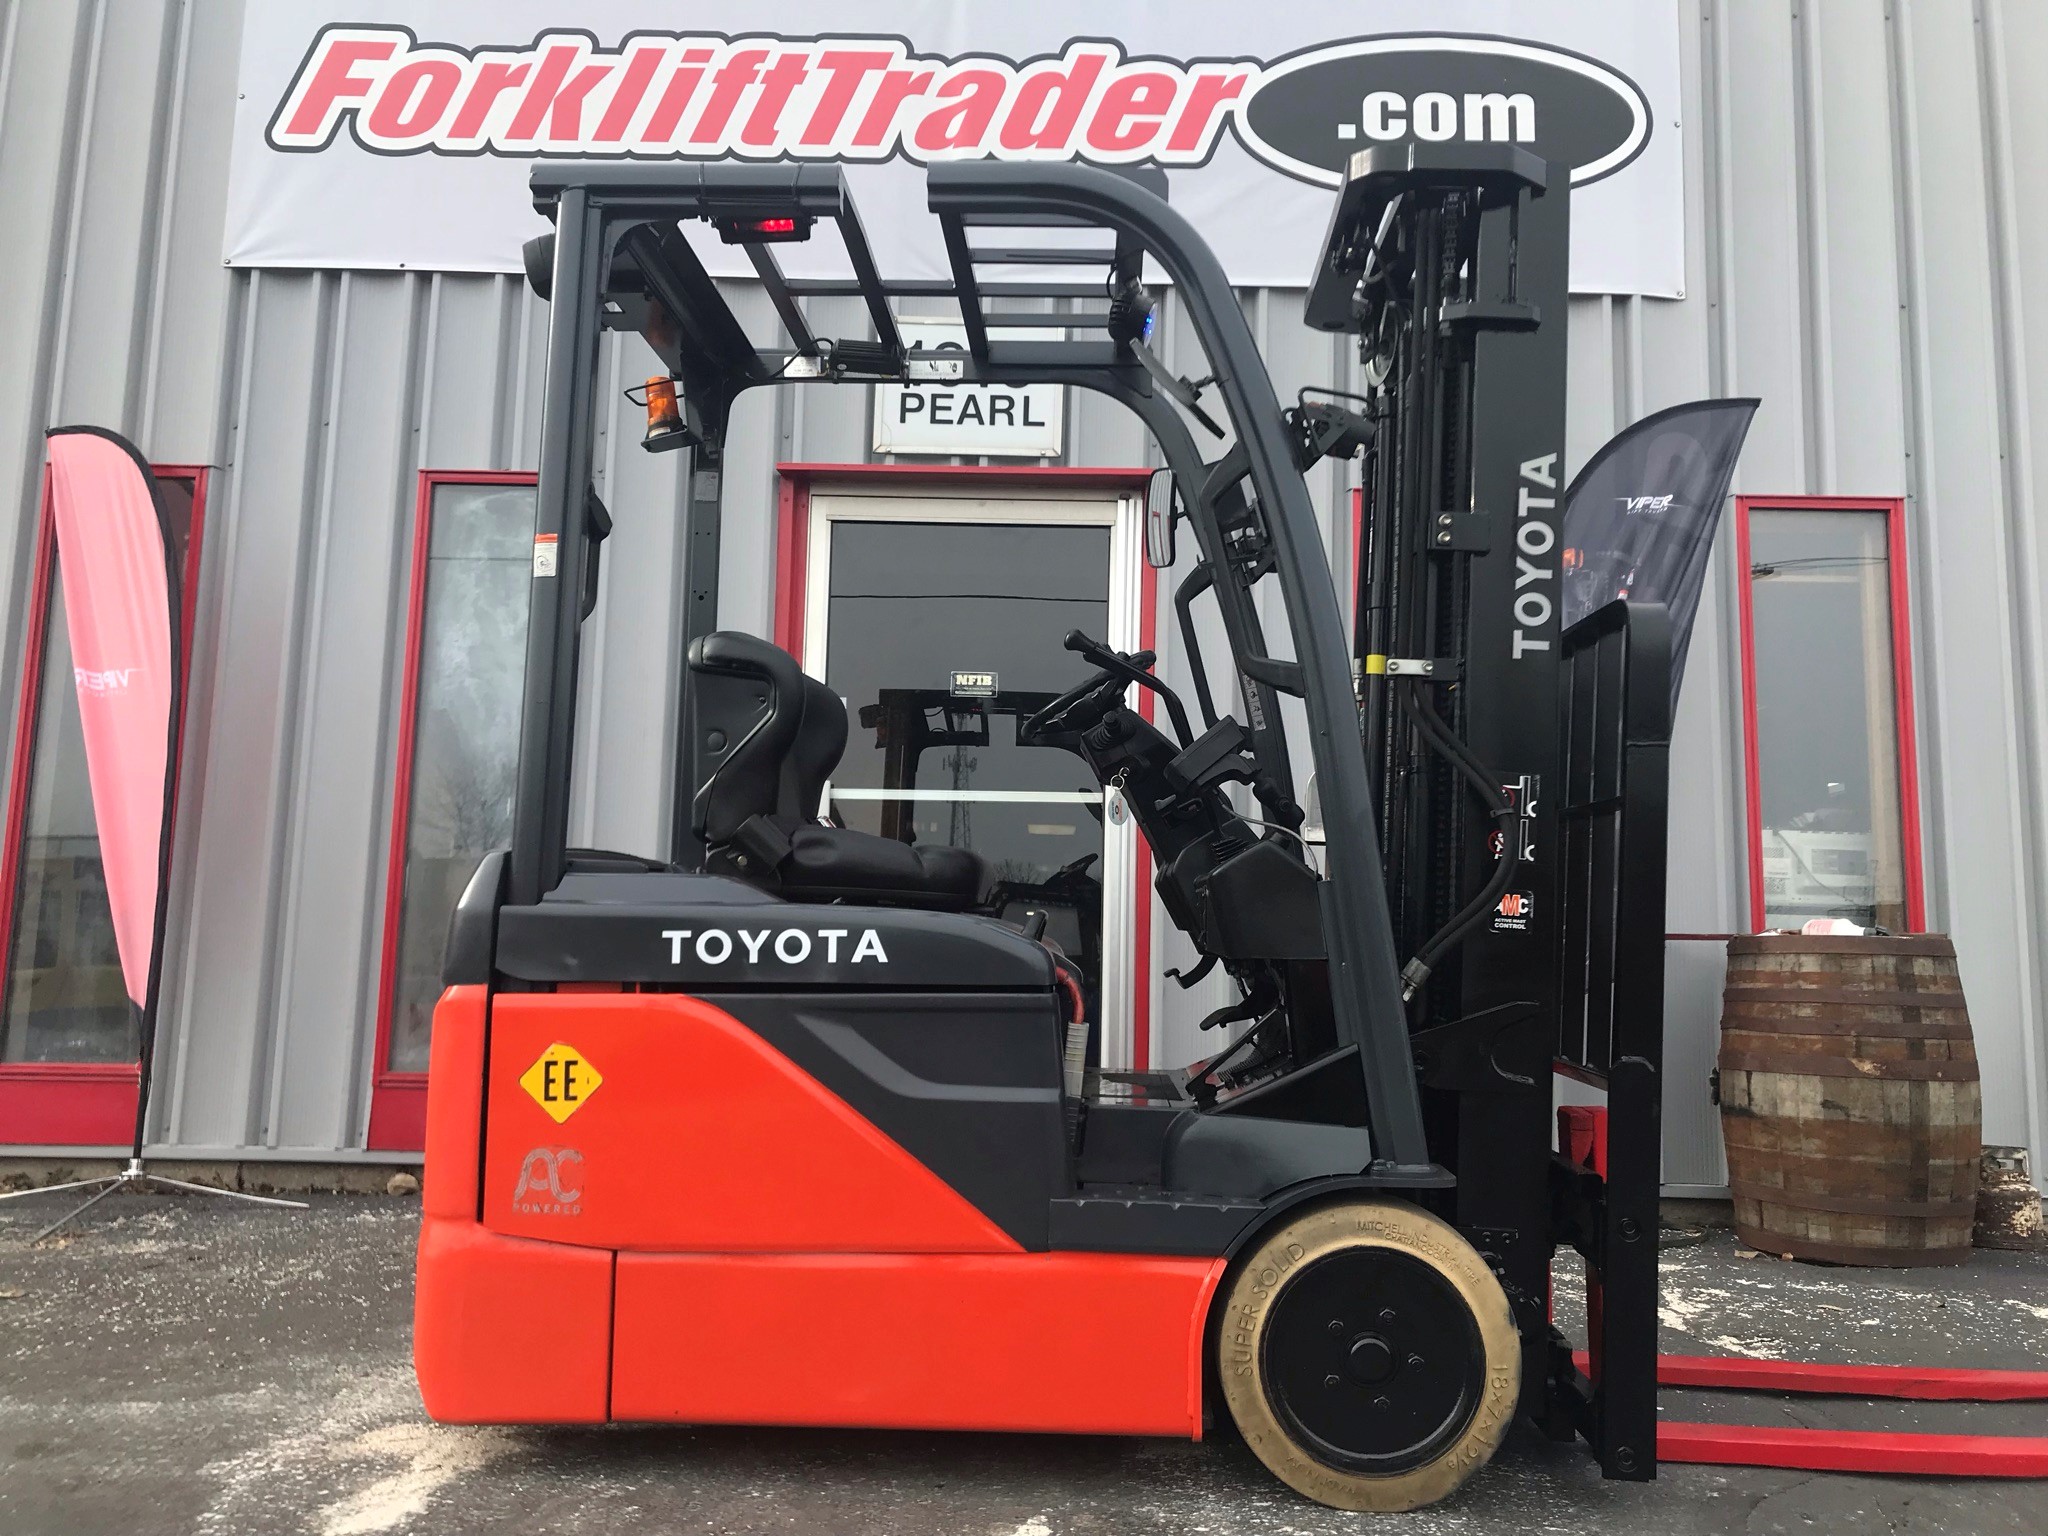 2015 Orange toyota forklift with 3,000lb capacity for sale